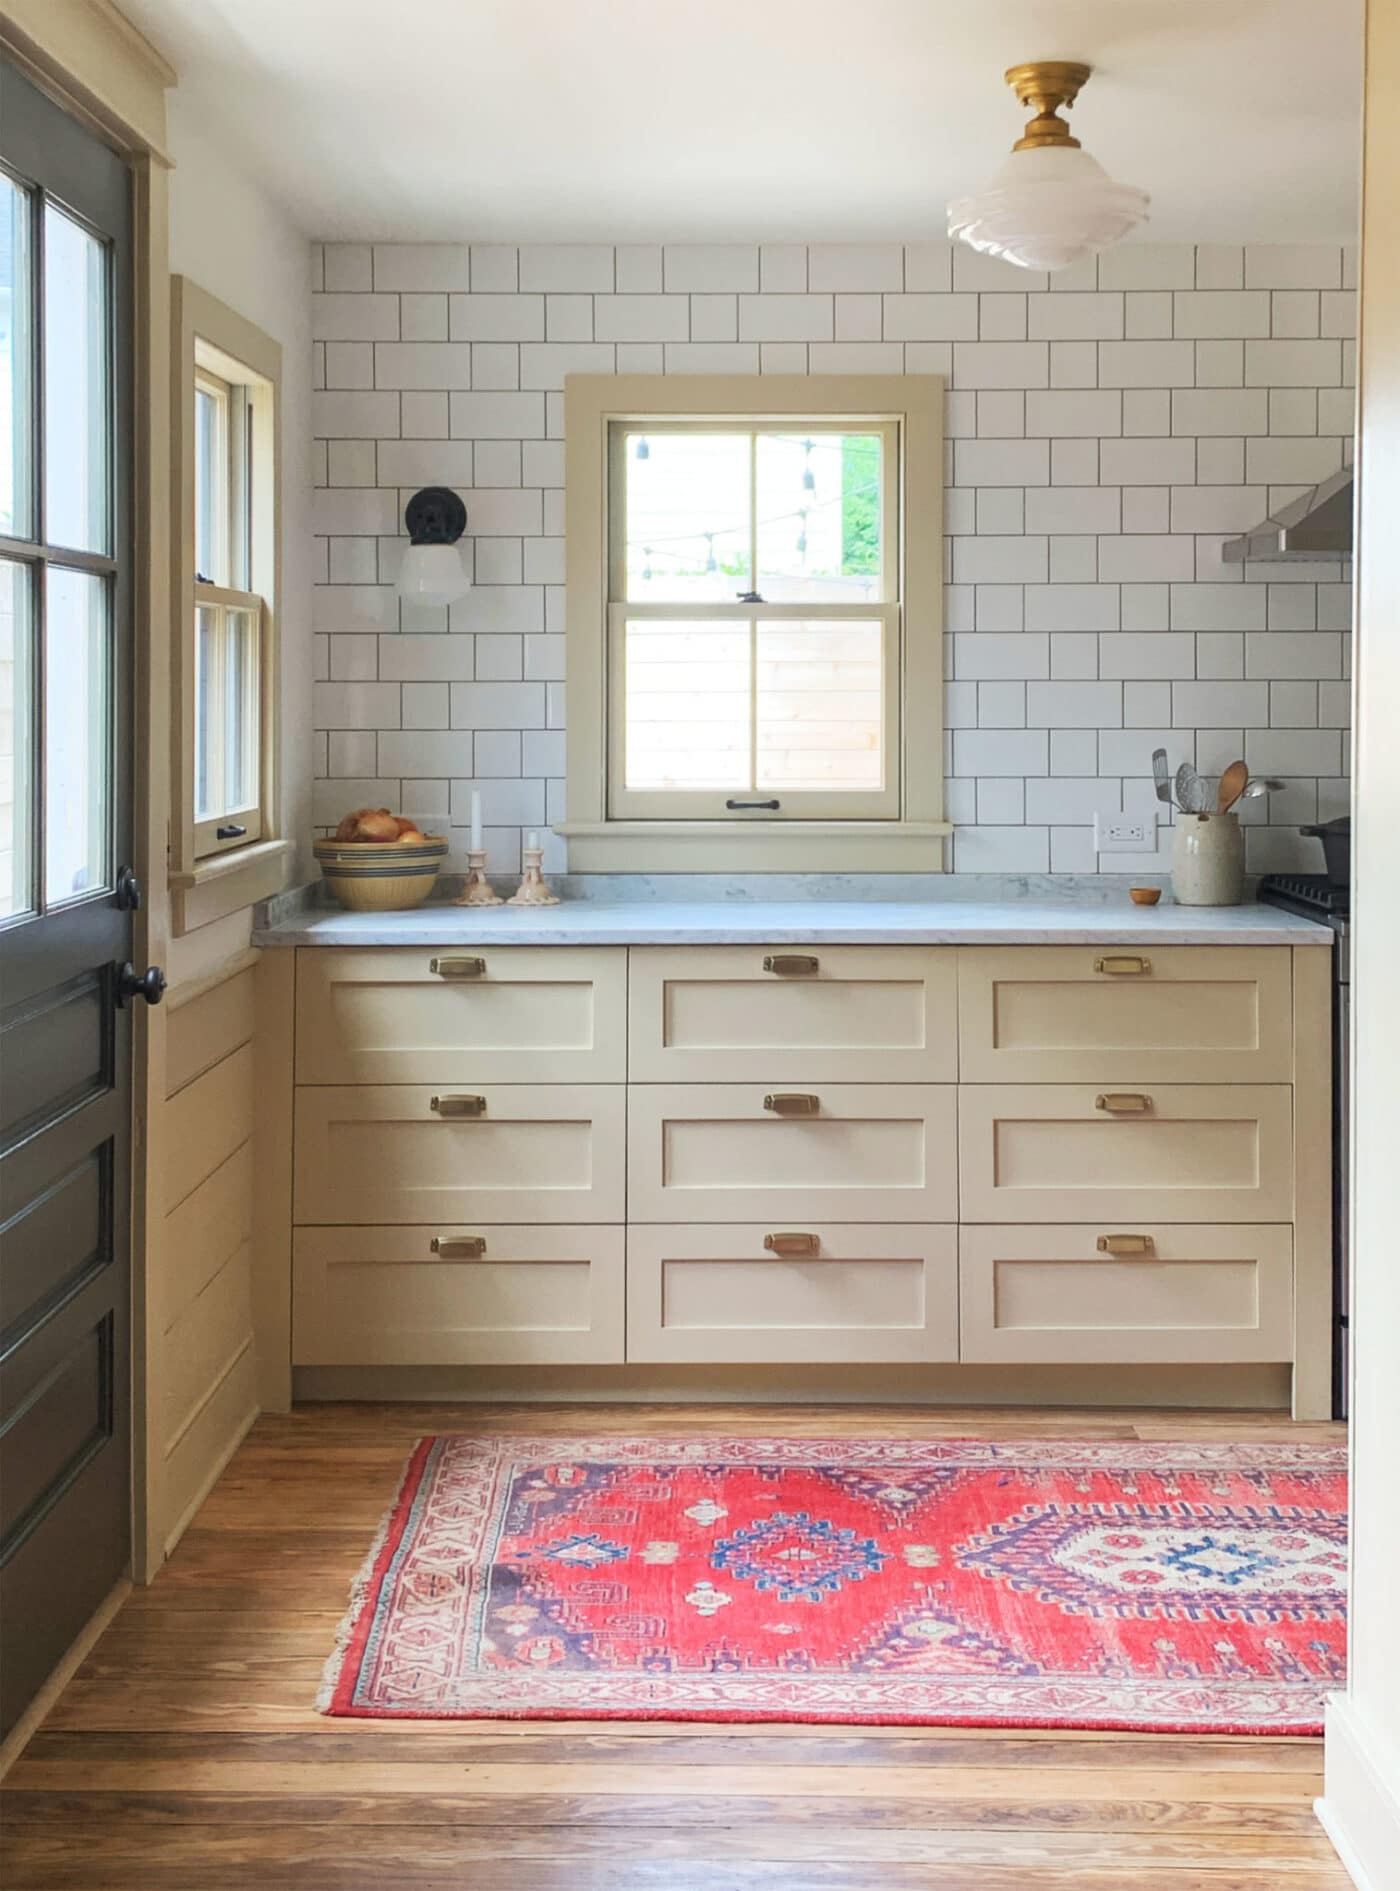 6 Cream Colored Cabinets For a Warm, Welcoming Kitchen - SemiStories